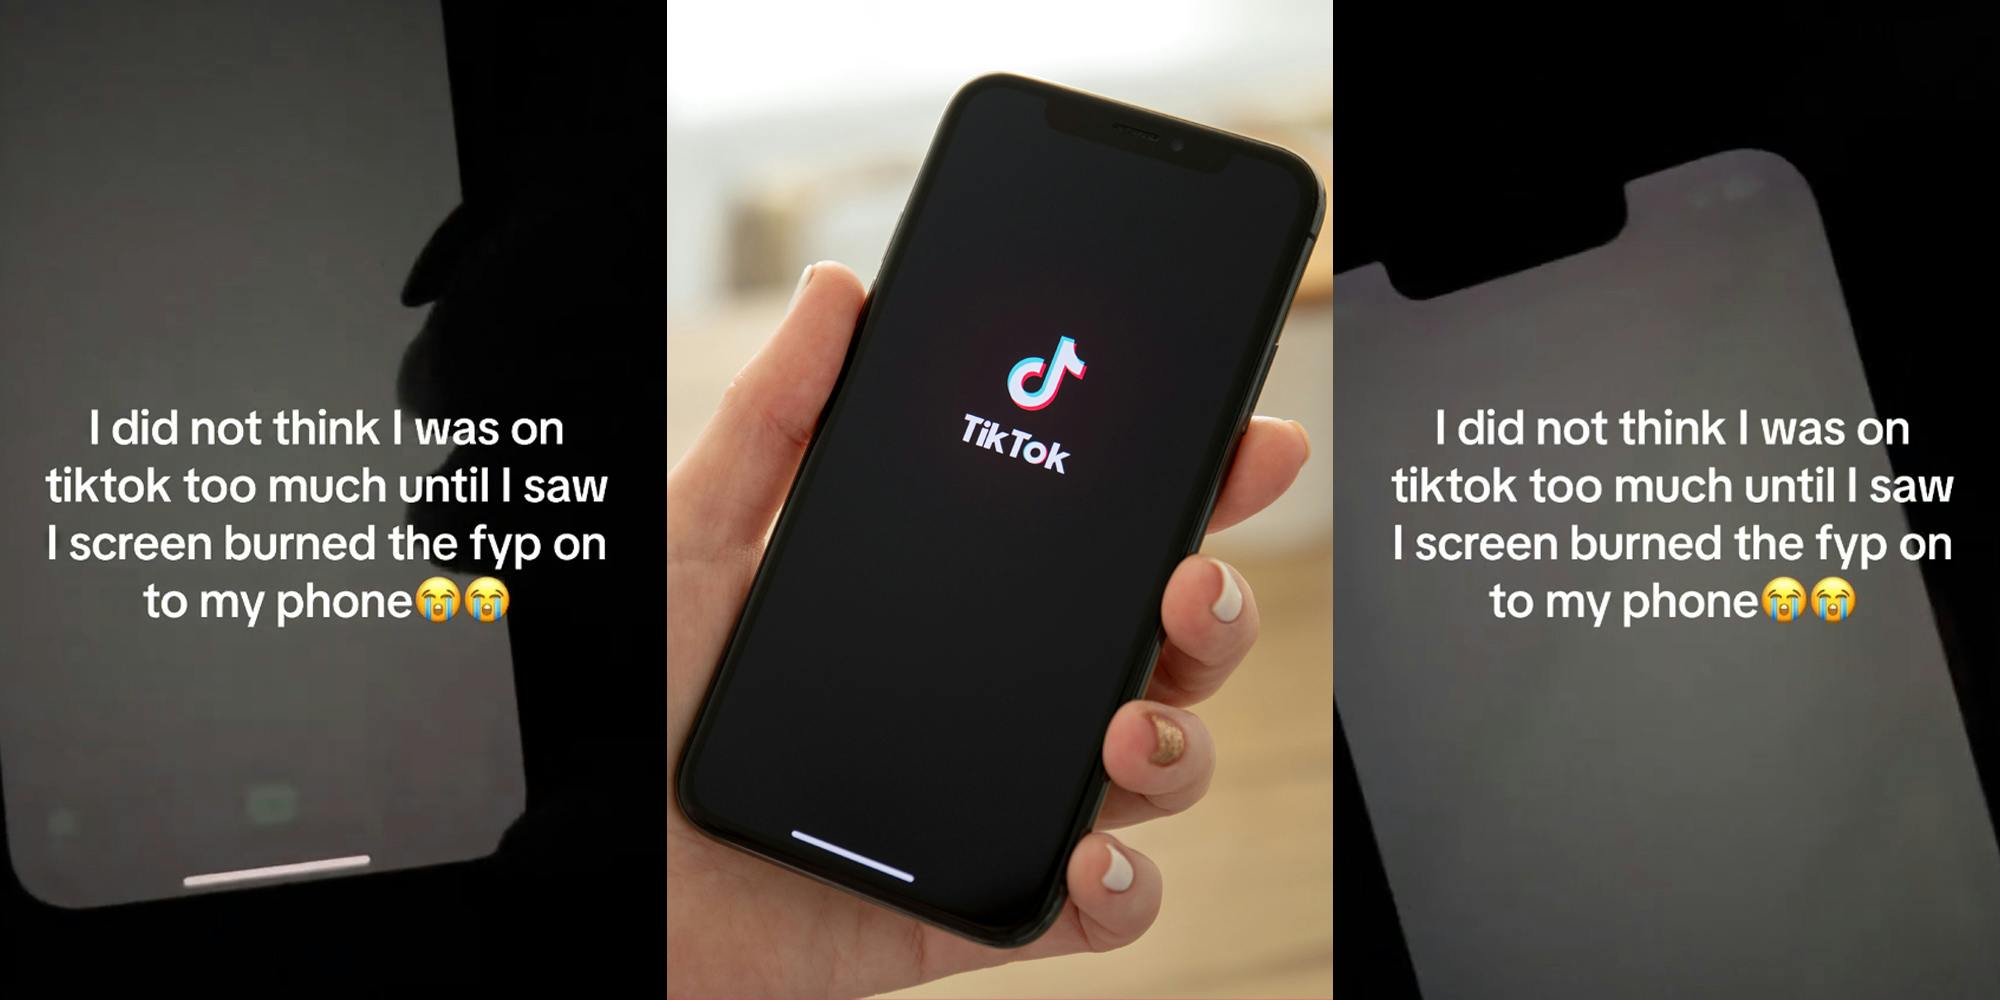 TikTok For You screen burnt onto phone screen with caption "I did not think I was on tiktok too much until I saw I screen burned the fyp to my phone" (l) hand holding phone with TikTok on screen (c) TikTok For You screen burnt onto phone screen with caption "I did not think I was on tiktok too much until I saw I screen burned the fyp to my phone" (r)